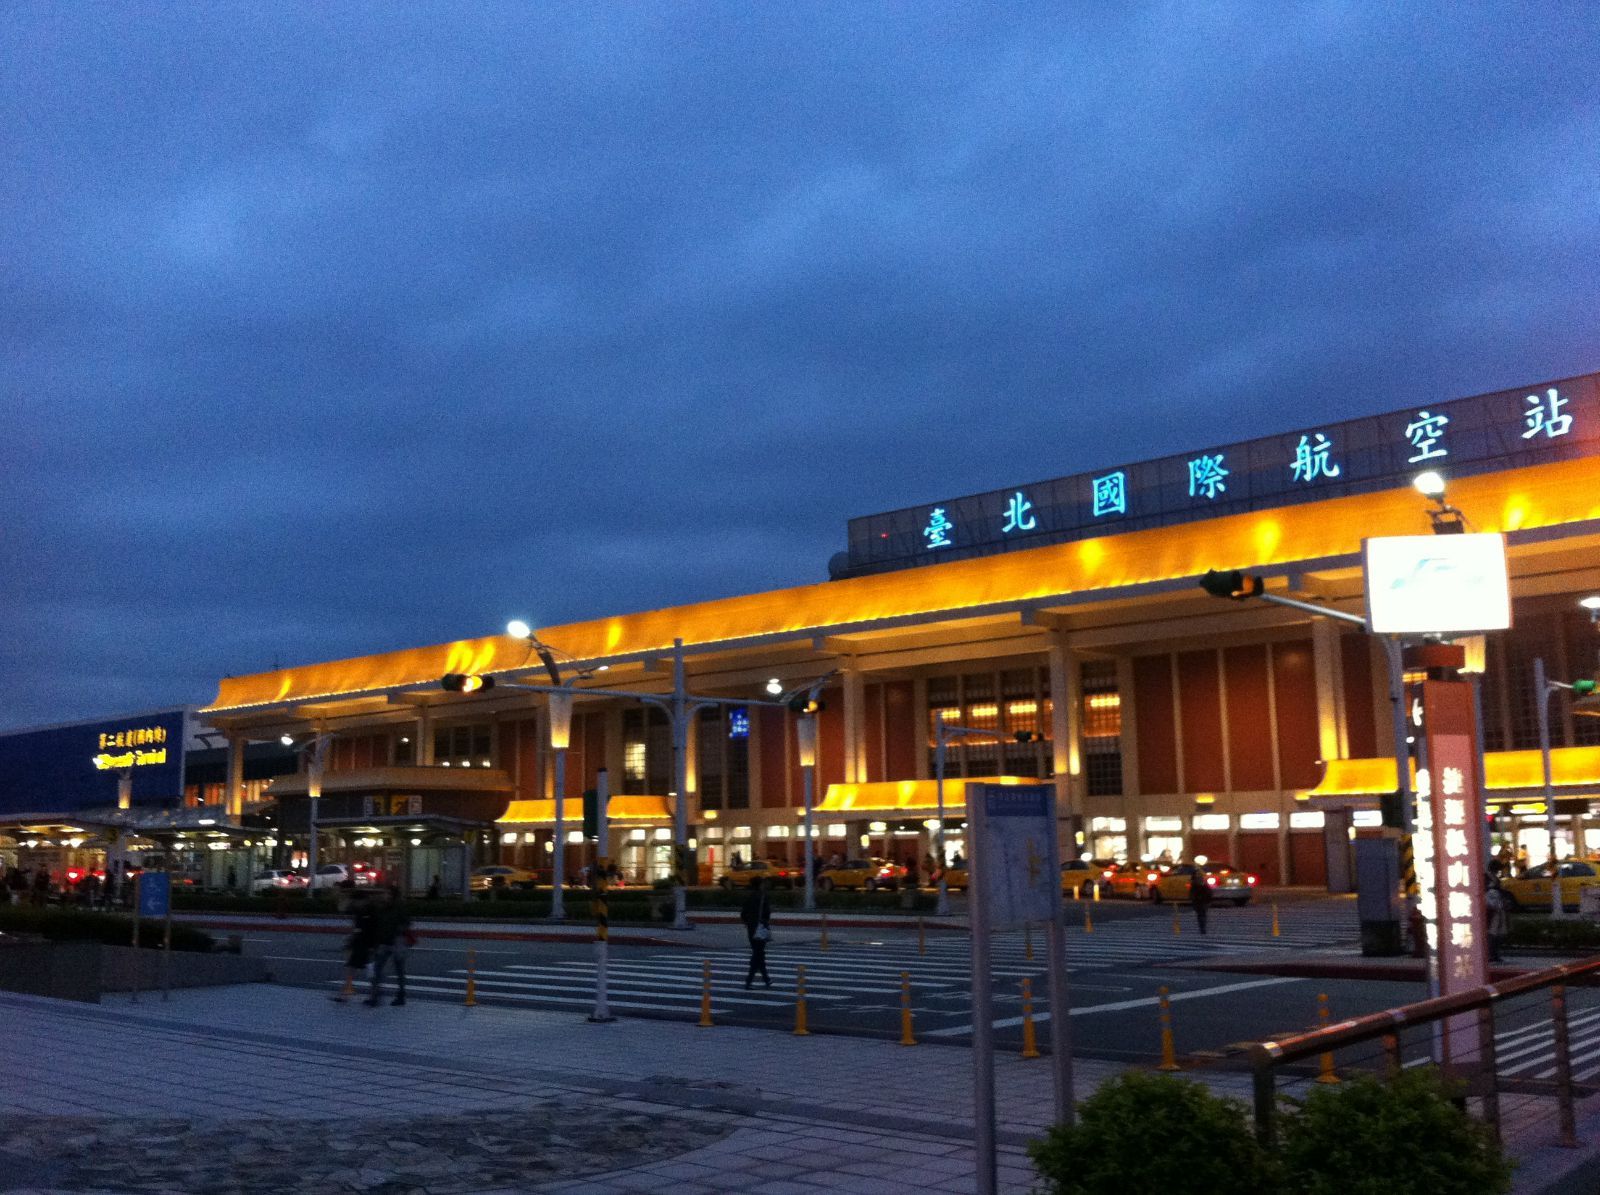 The Complete Guide To Taipei's Taoyuan International Airport - Flipboard